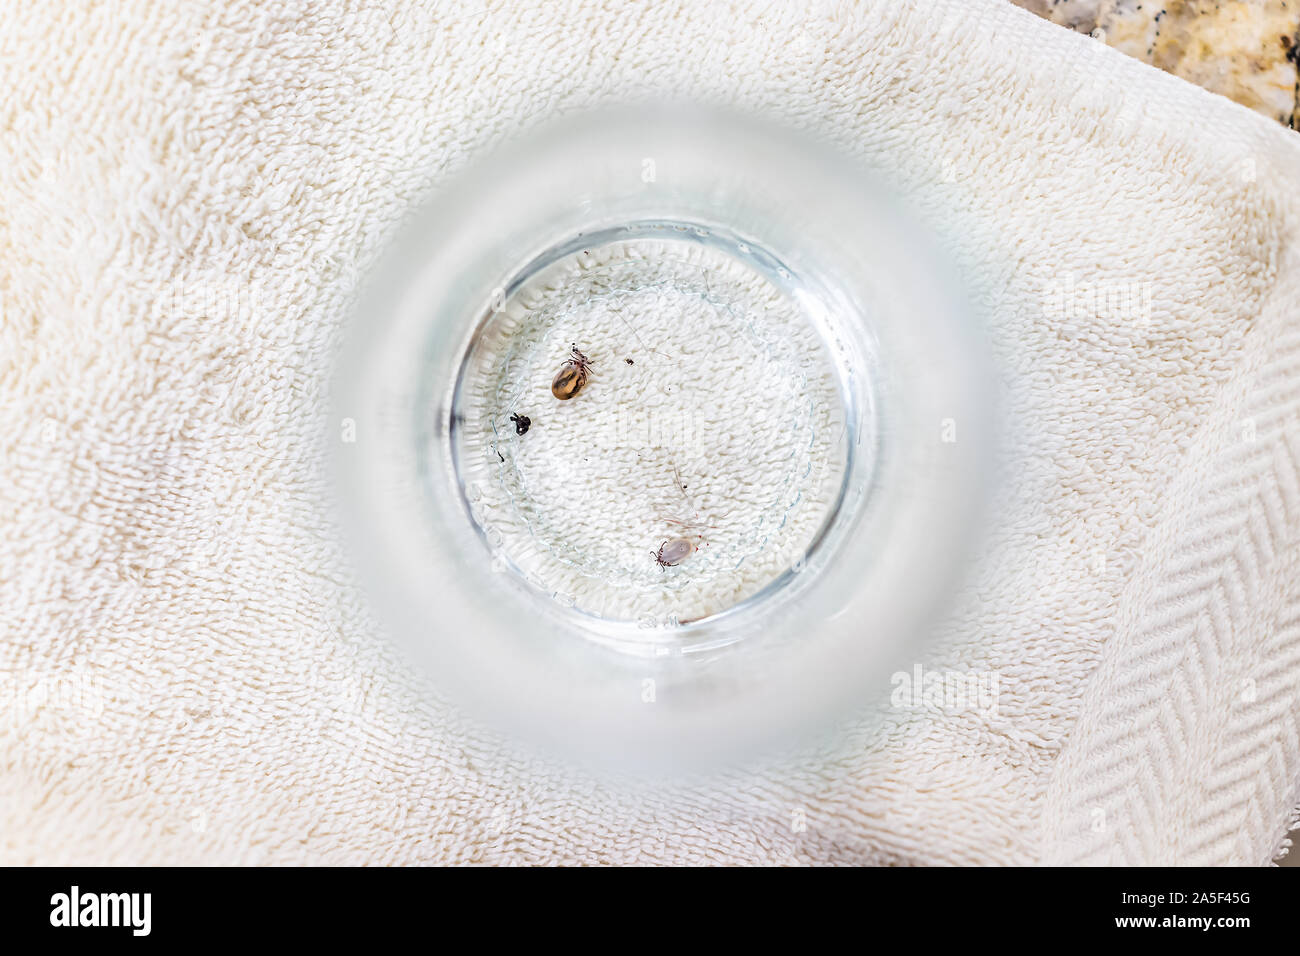 Macro flat top closeup of two dead Lone star ticks swimming in alcohol or water solution of cup with towel background Stock Photo